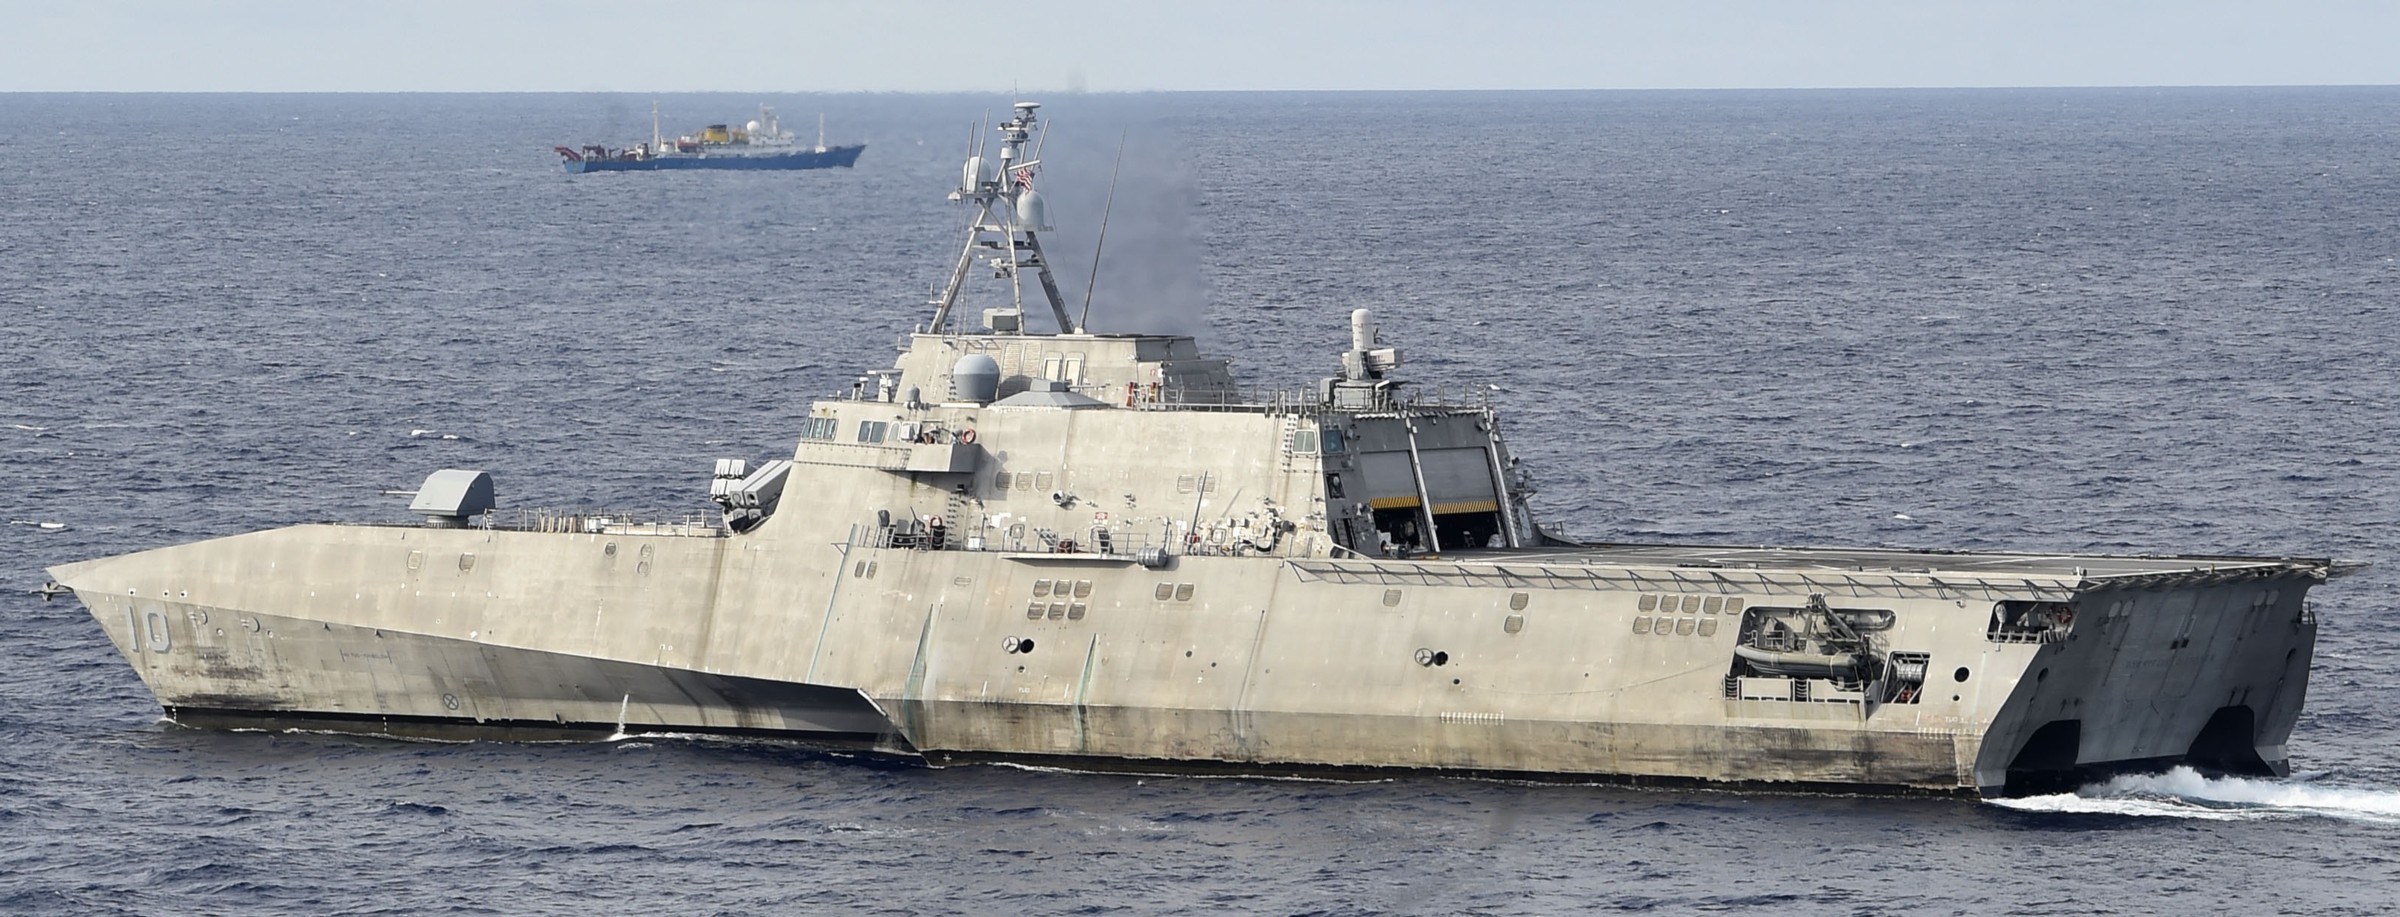 lcs-10 uss gabrielle giffords littoral combat ship independence class us navy 63